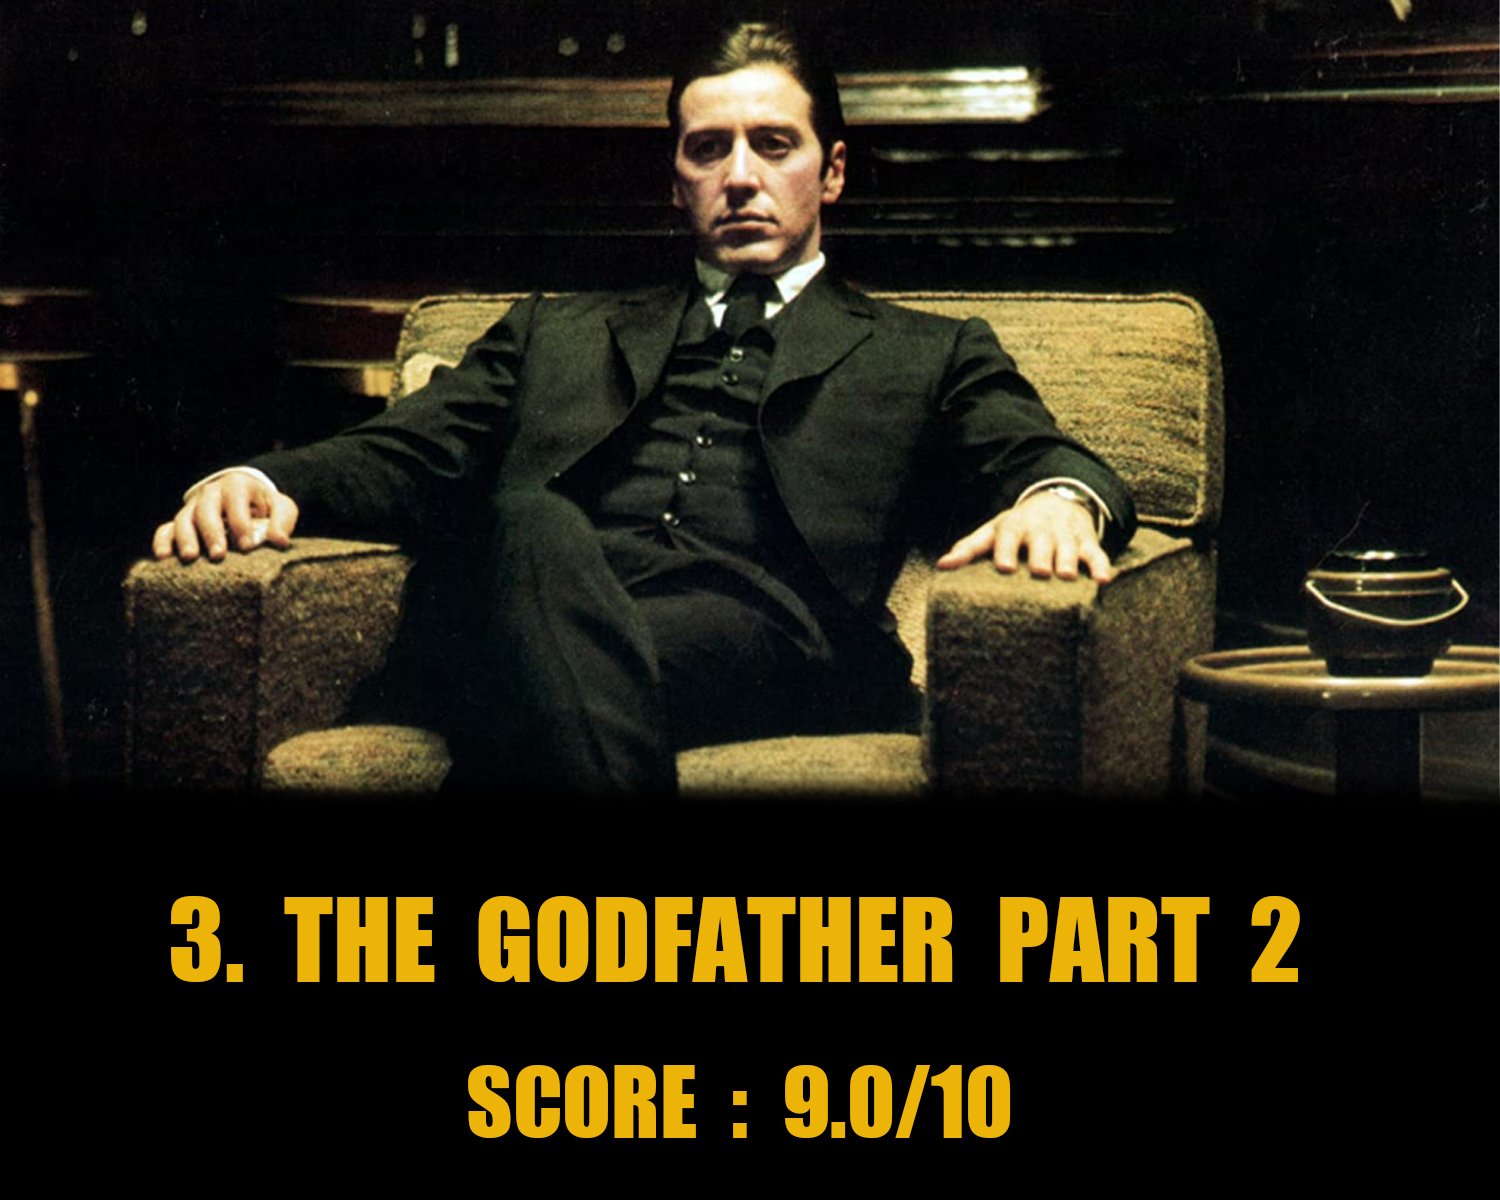 The Godfather - Part II (1974)